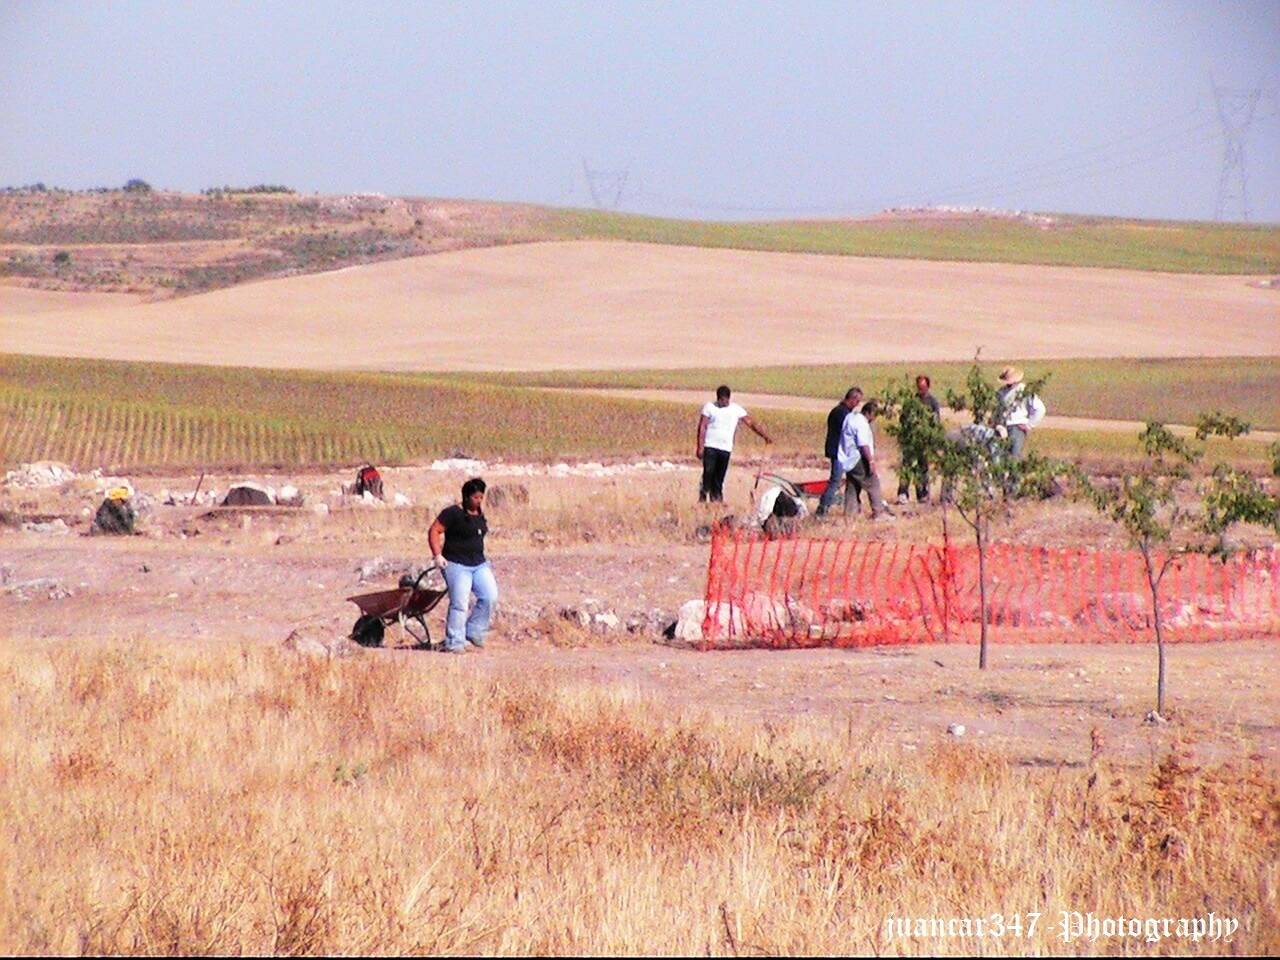 Archaeological works